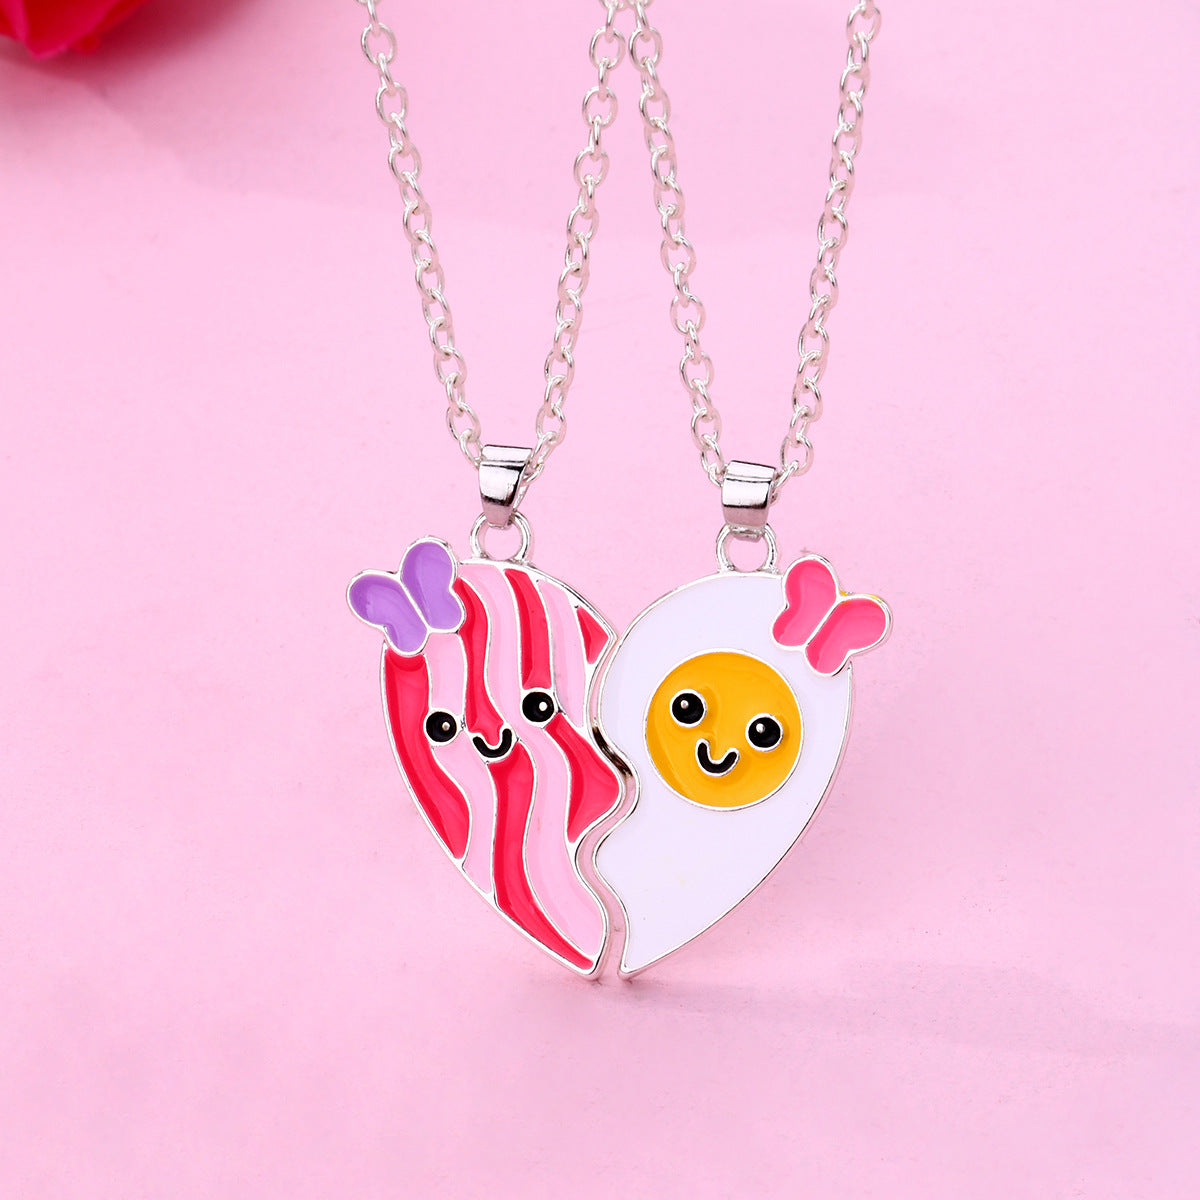 SkyWiseWin Best Friend Necklace for Kids, Color BFF Unicorn Necklace for  Children's Pack of 2 in Kenya | Whizz Pendants